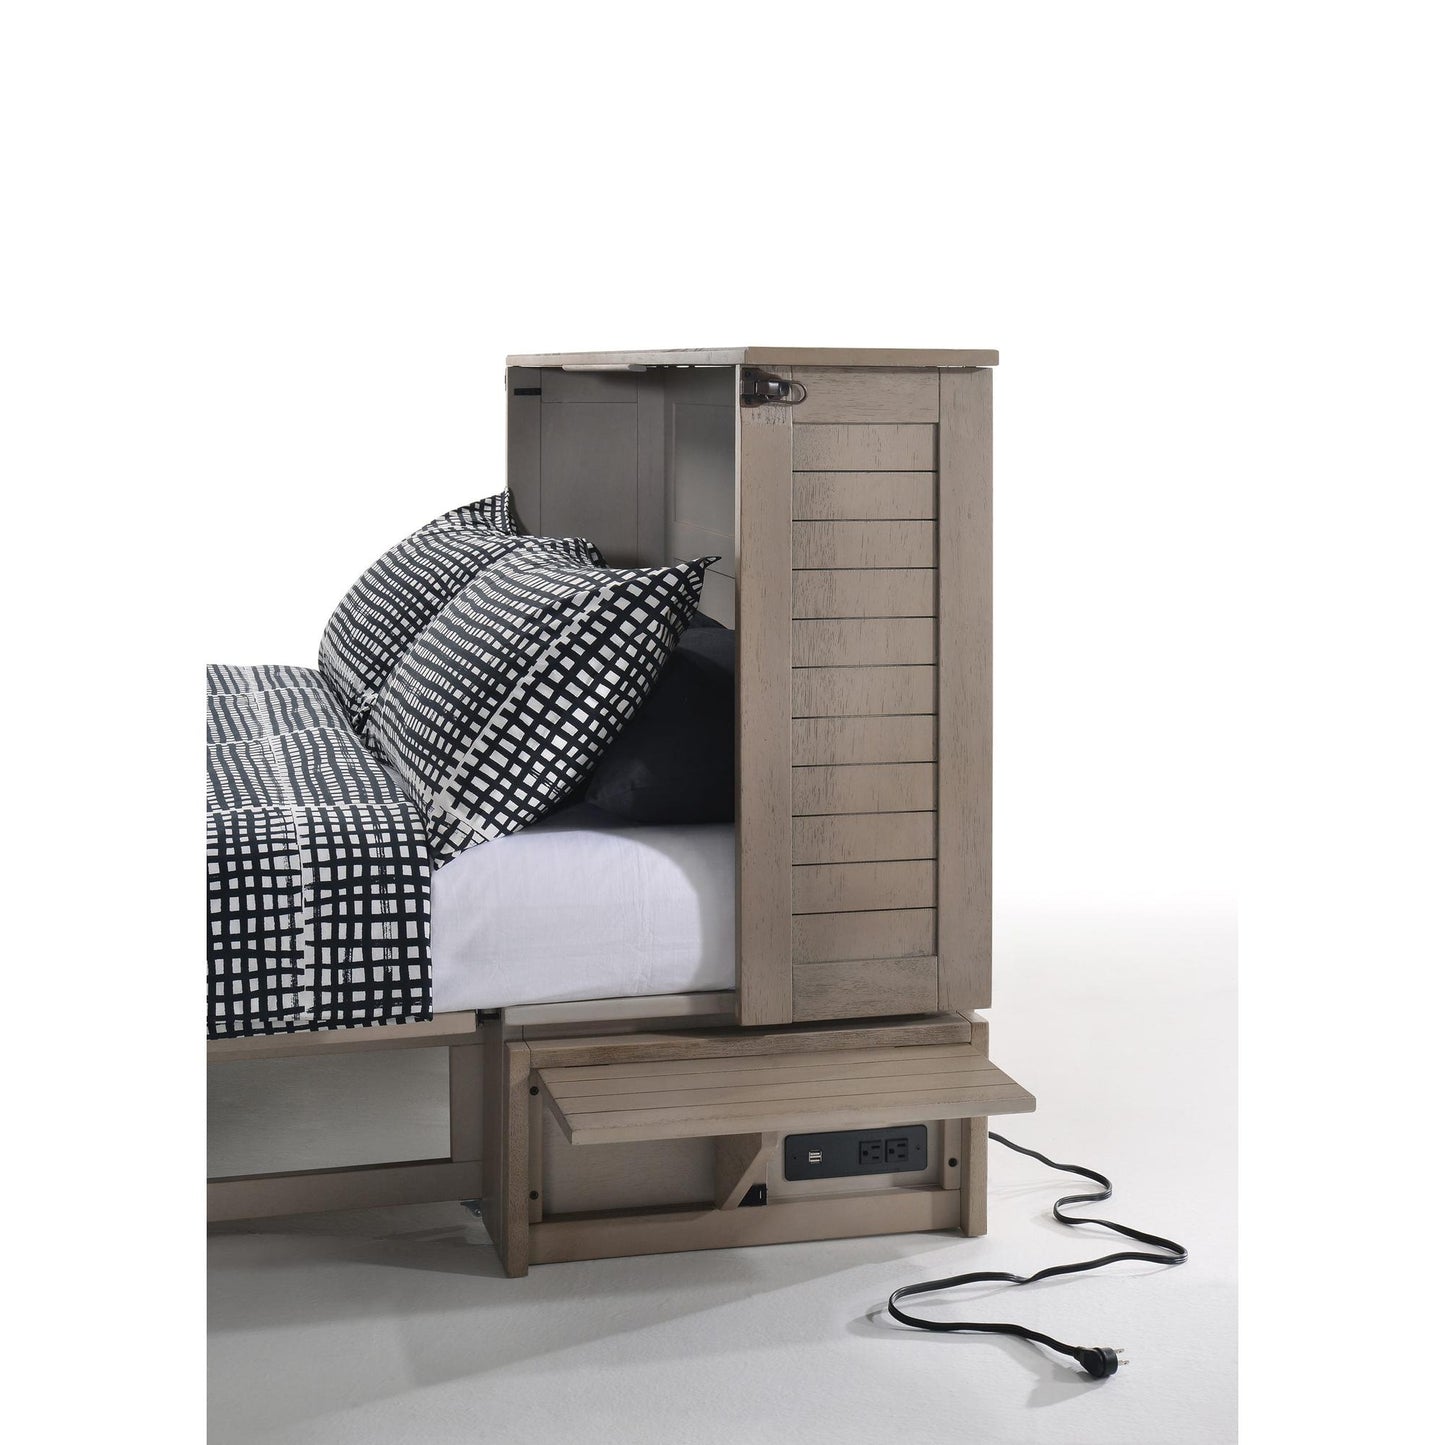 Poppy Murphy Cabinet Bed in Brushed Driftwood